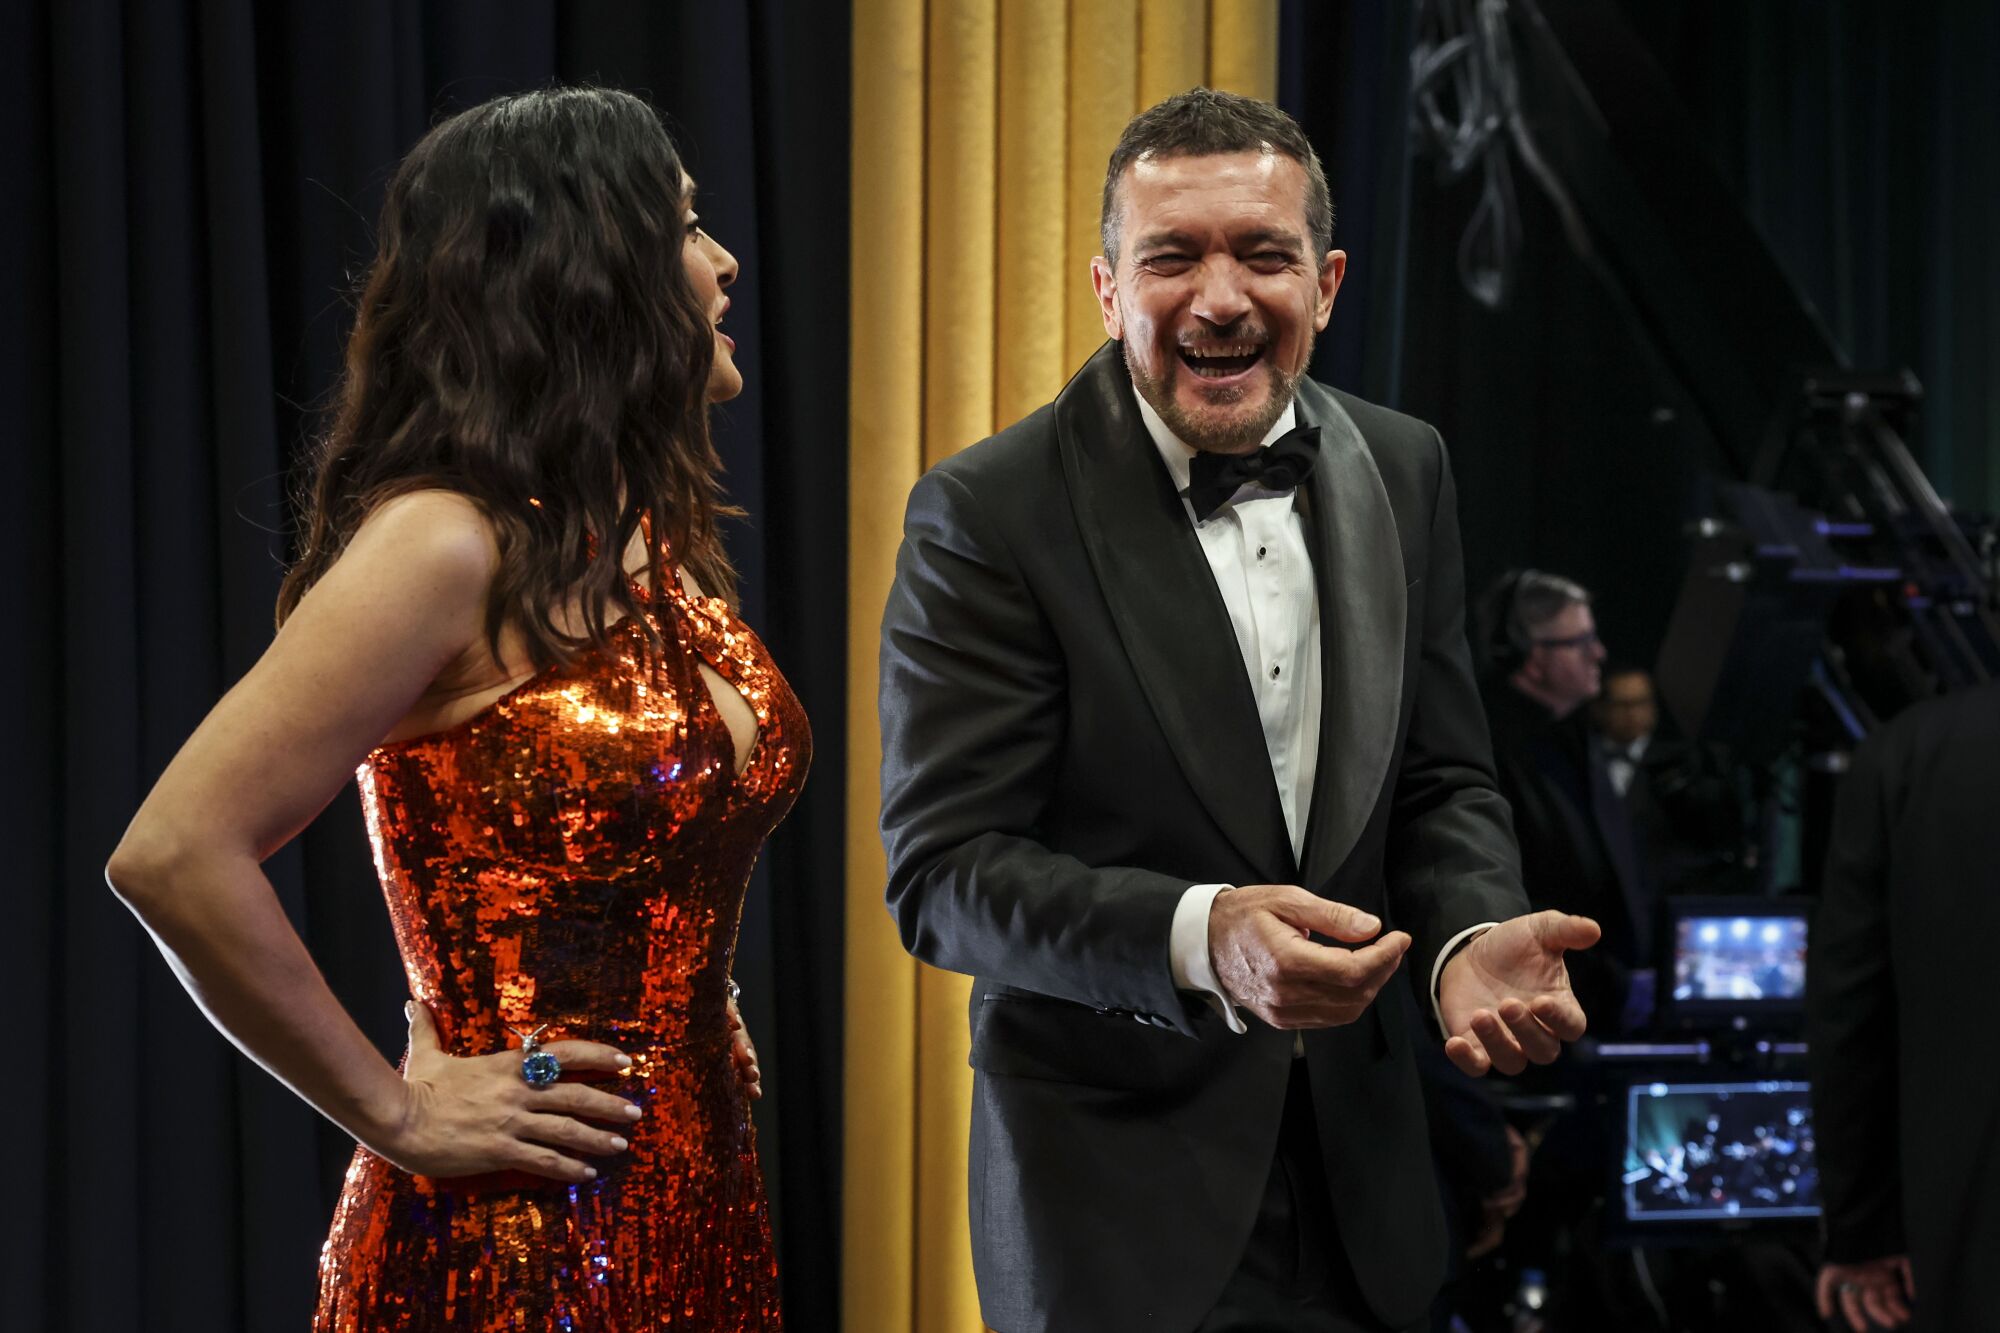 Salma Hayek and Antonio Banderas, backstage at the 95th Academy Awards at the Dolby Theatre.